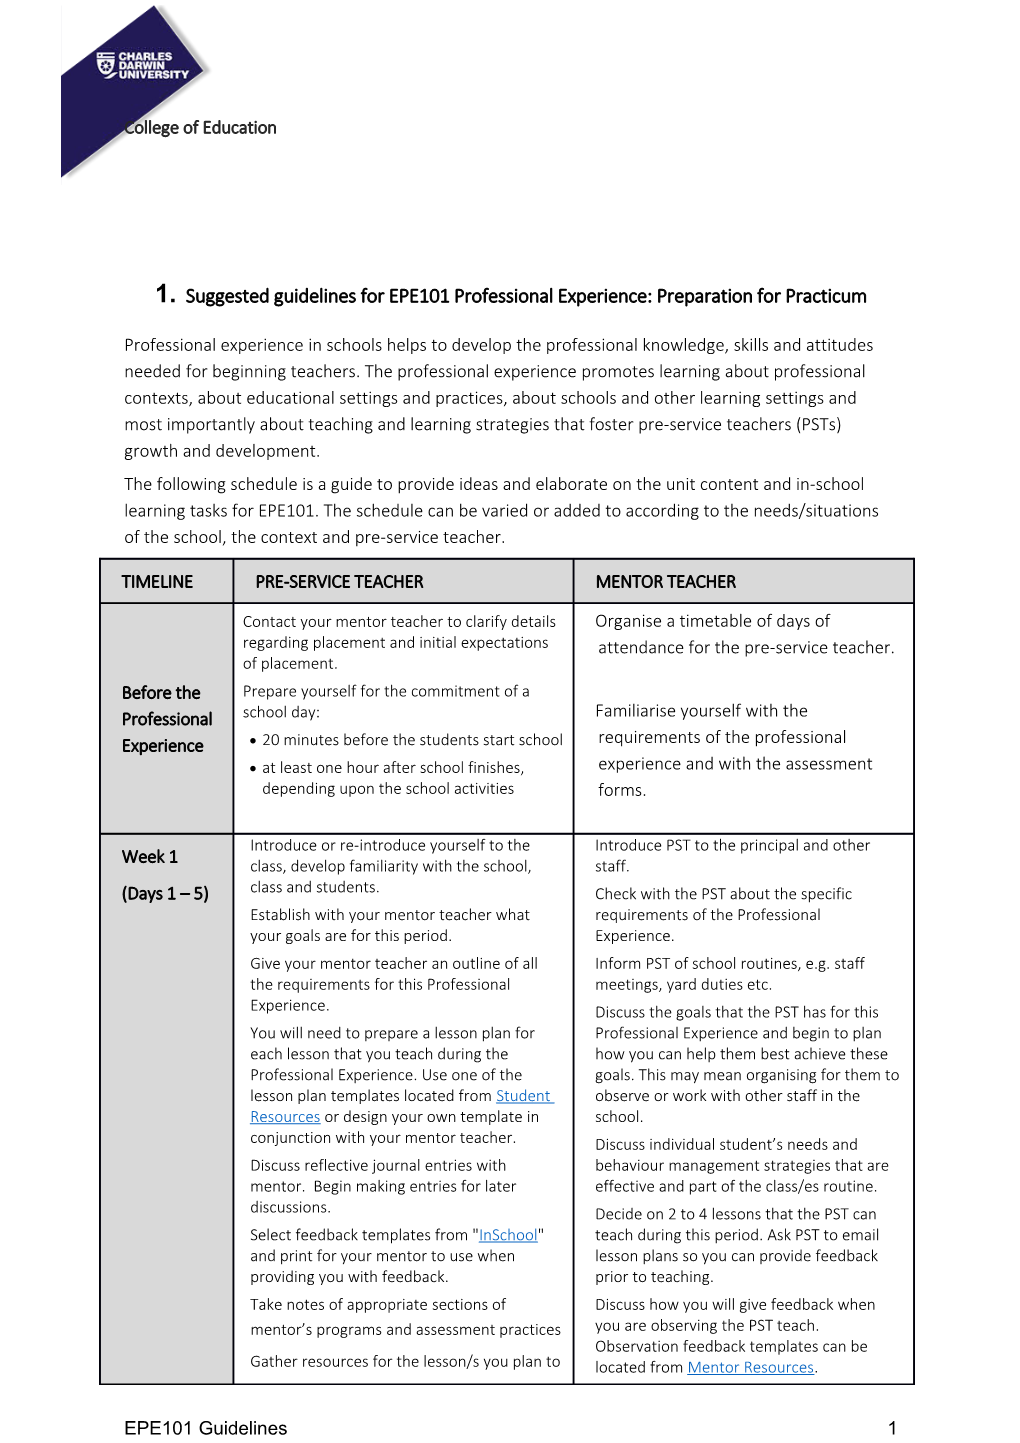 Suggested Guidelines for EPE101 Professional Experience: Preparation for Practicum